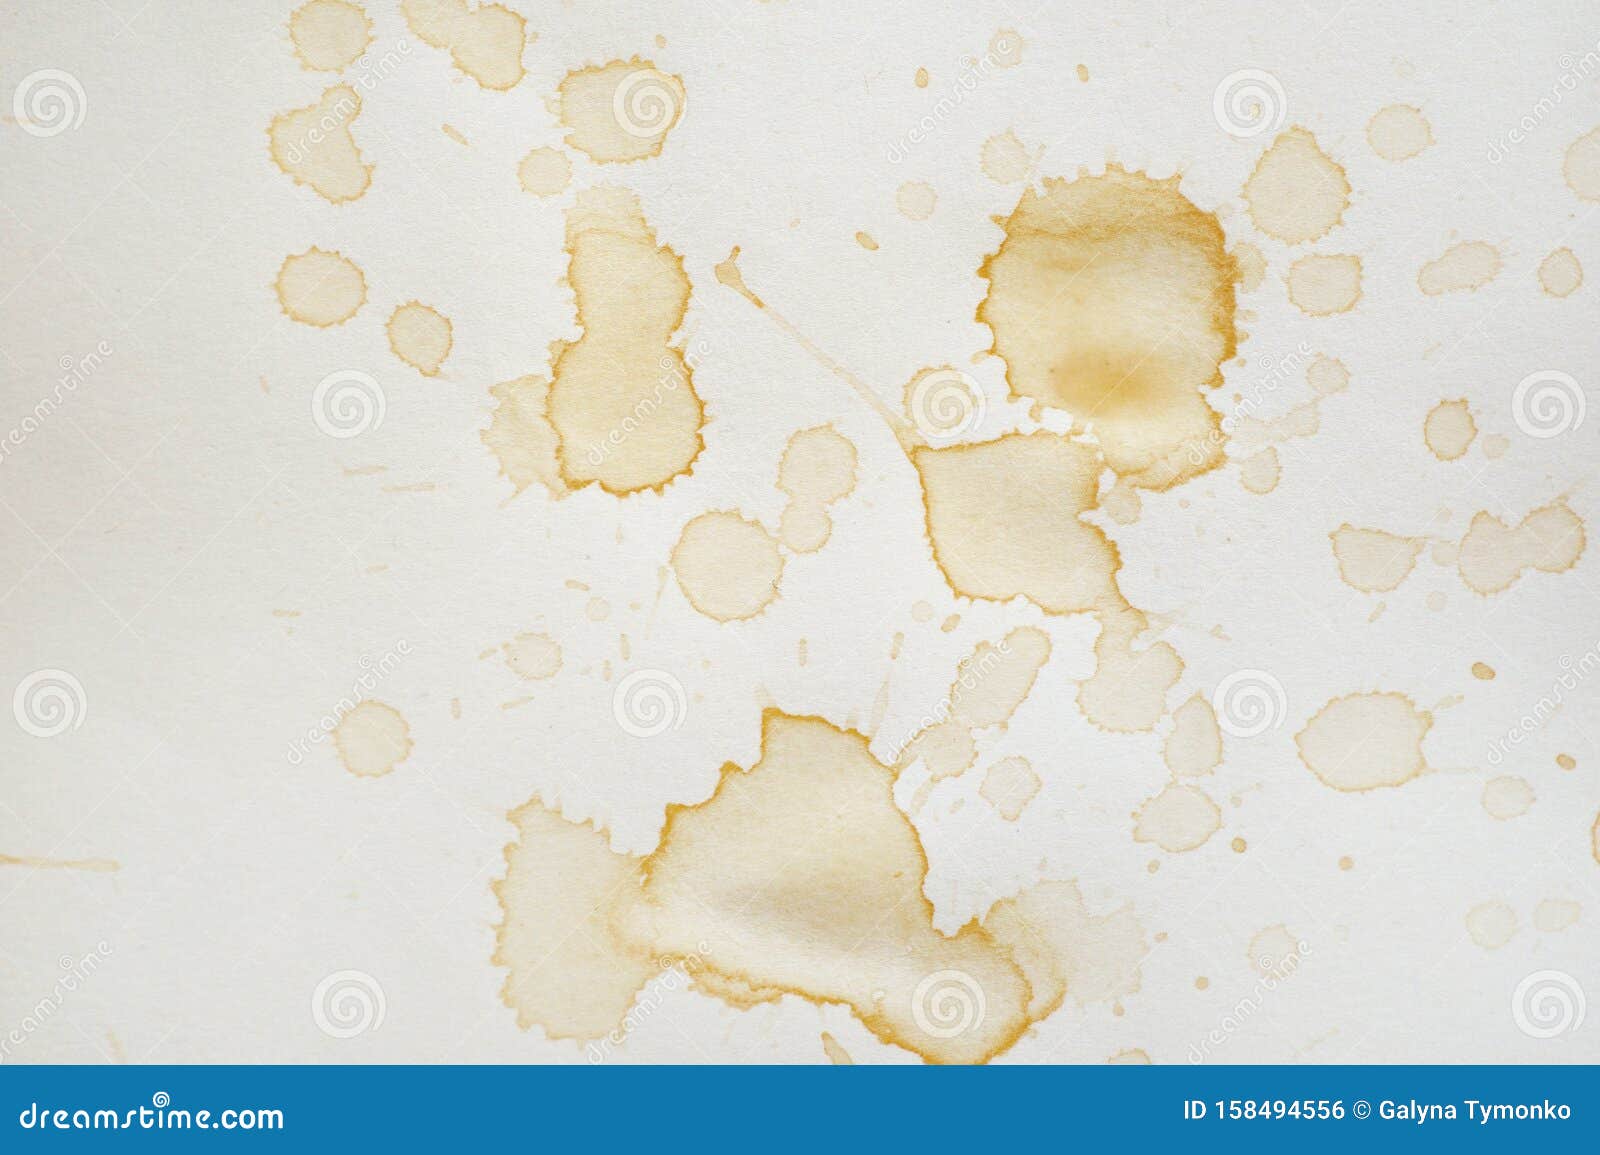 coffee or tea stains and traces - modern  on white background. splashes of cups, mugs and drops. use this high